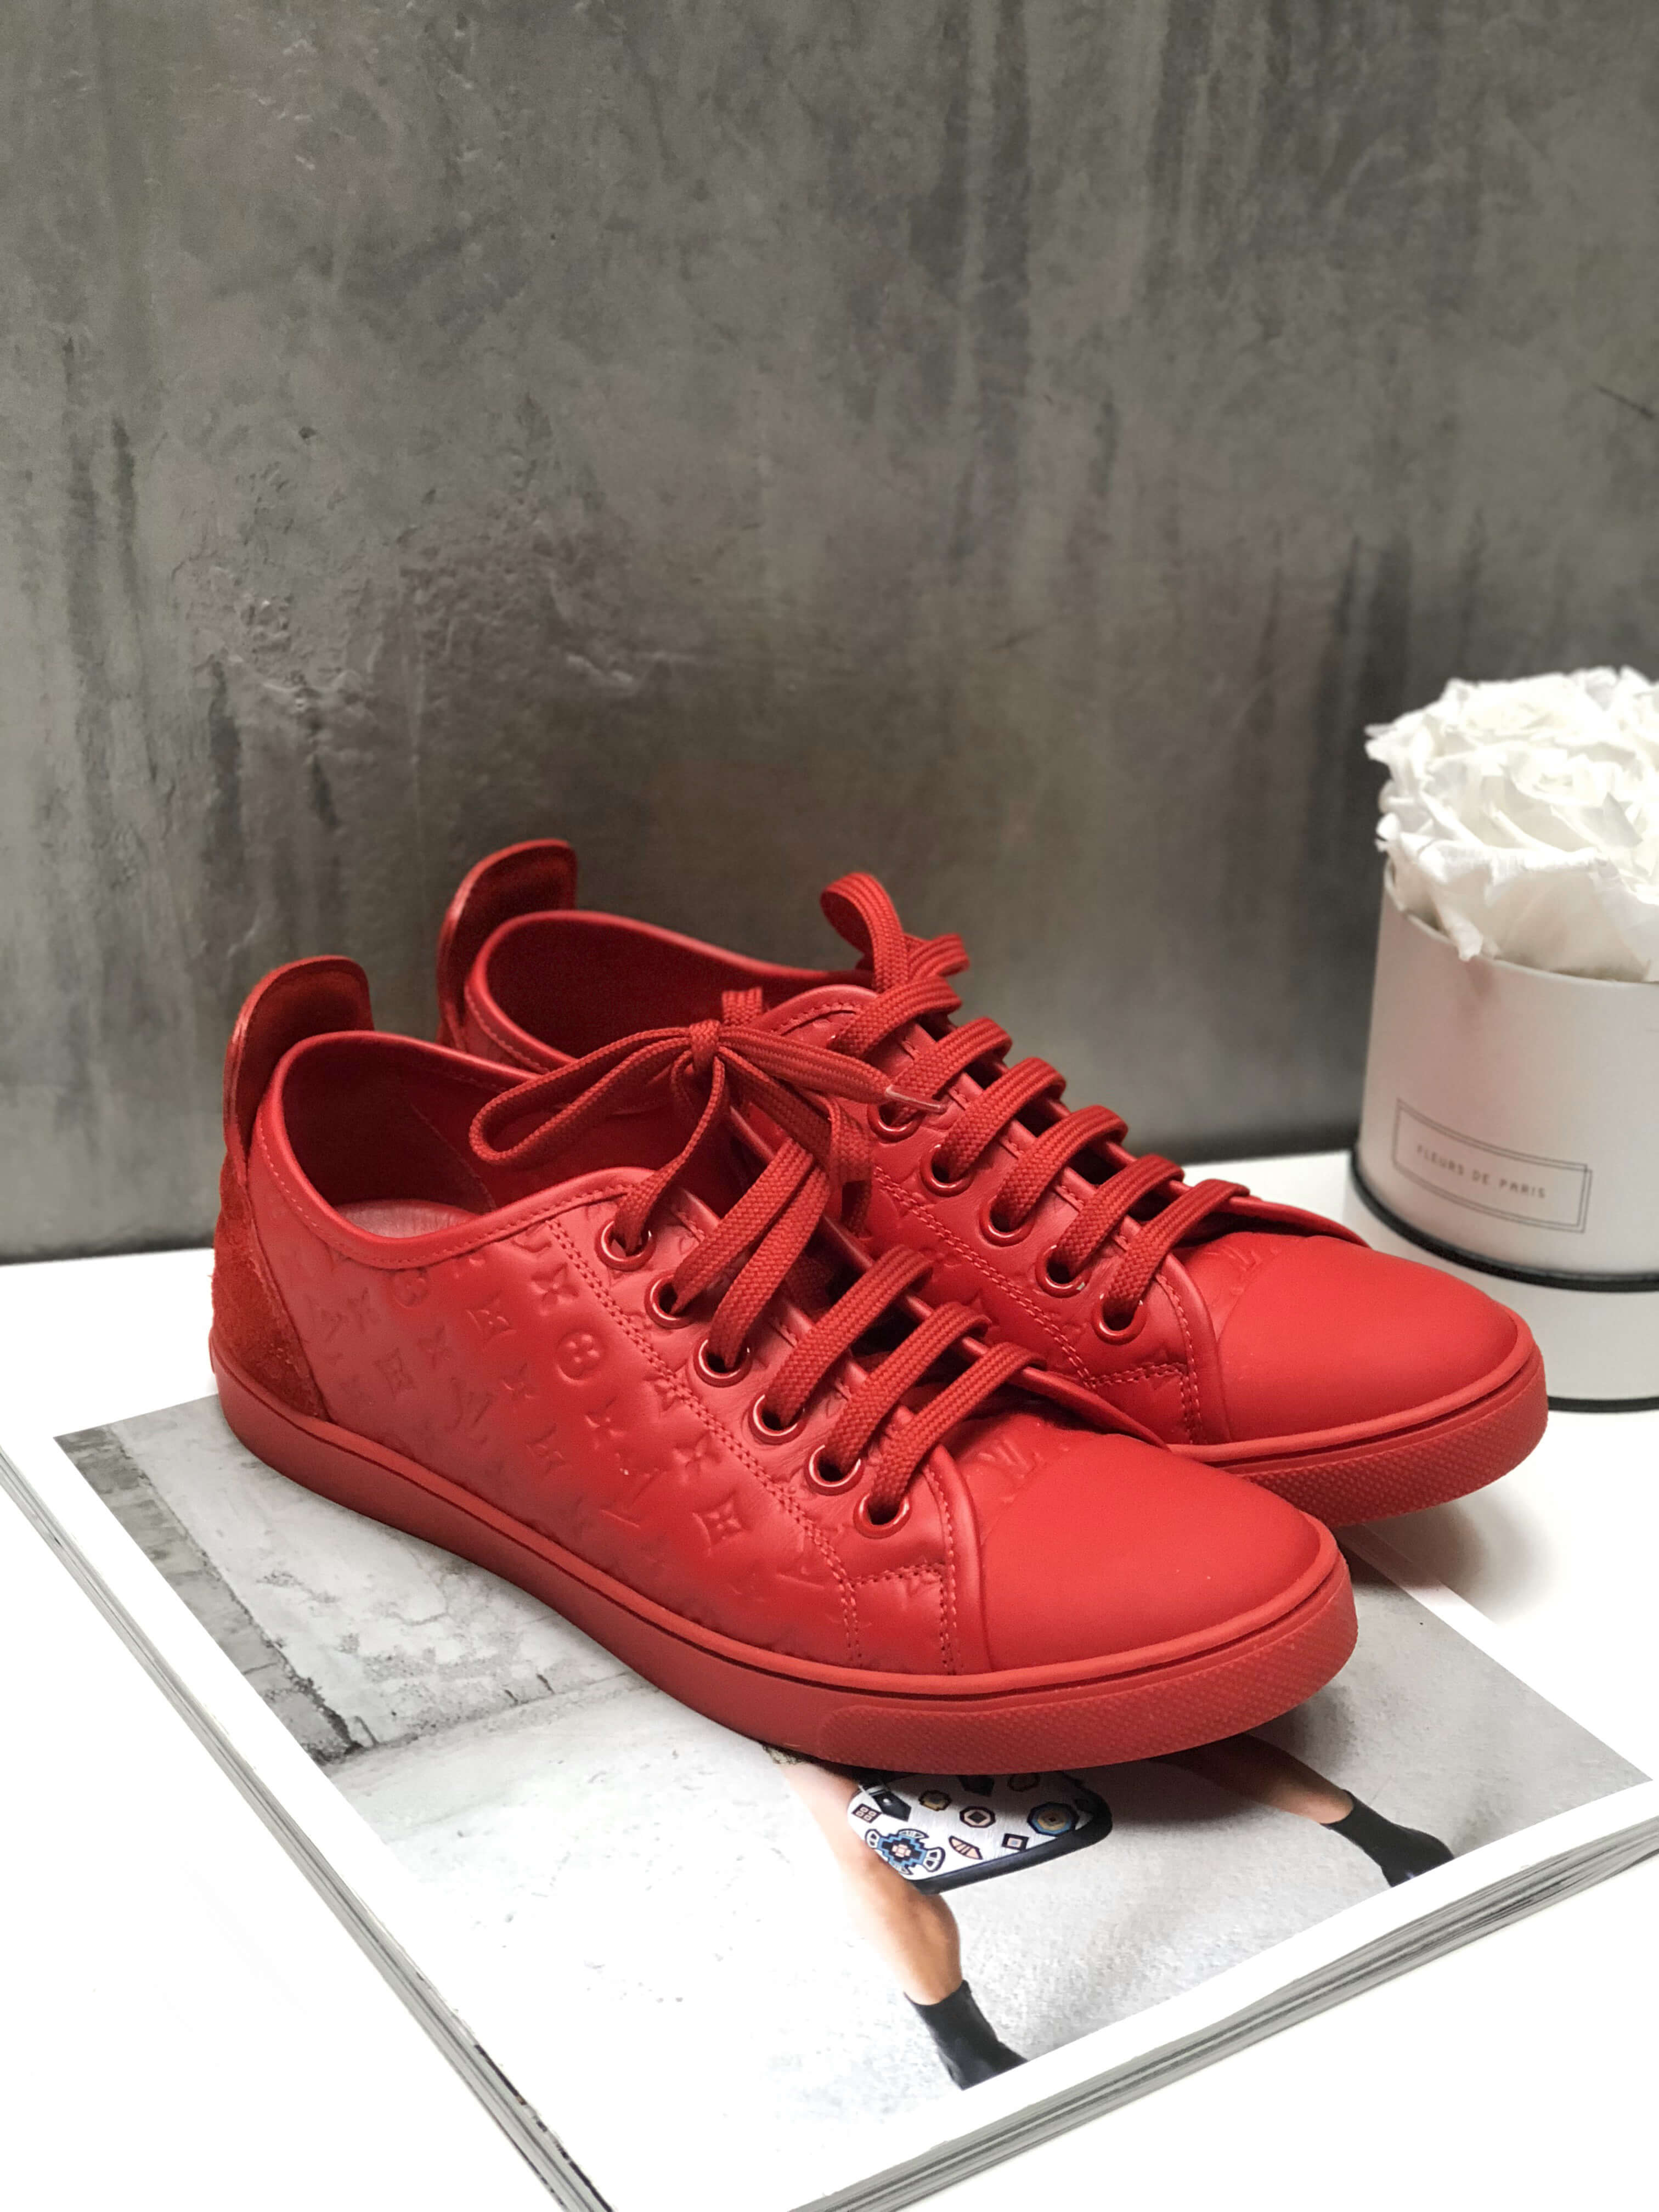 Louis Vuitton Women's Stellar Sneakers Limited Edition Since 1854 Monogram  Jacquard and Leather Red 1691382